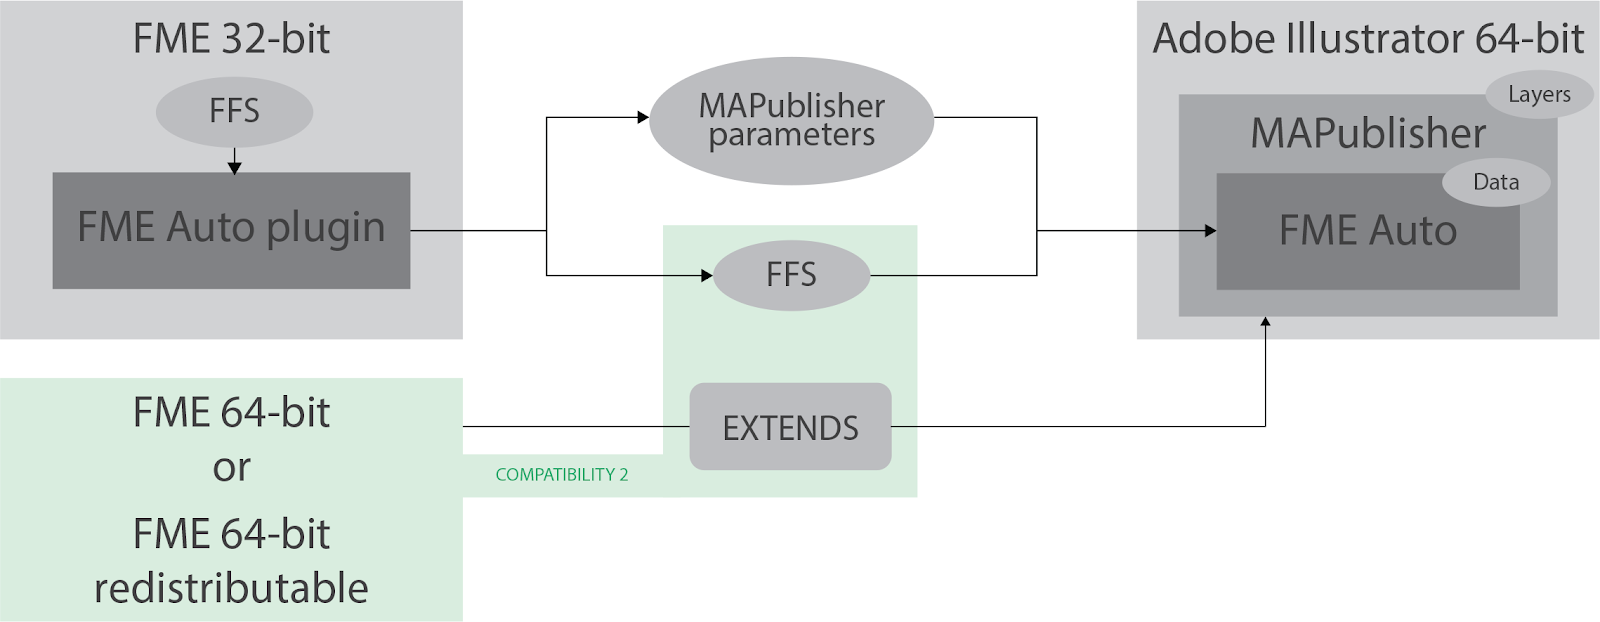 mapublisher support